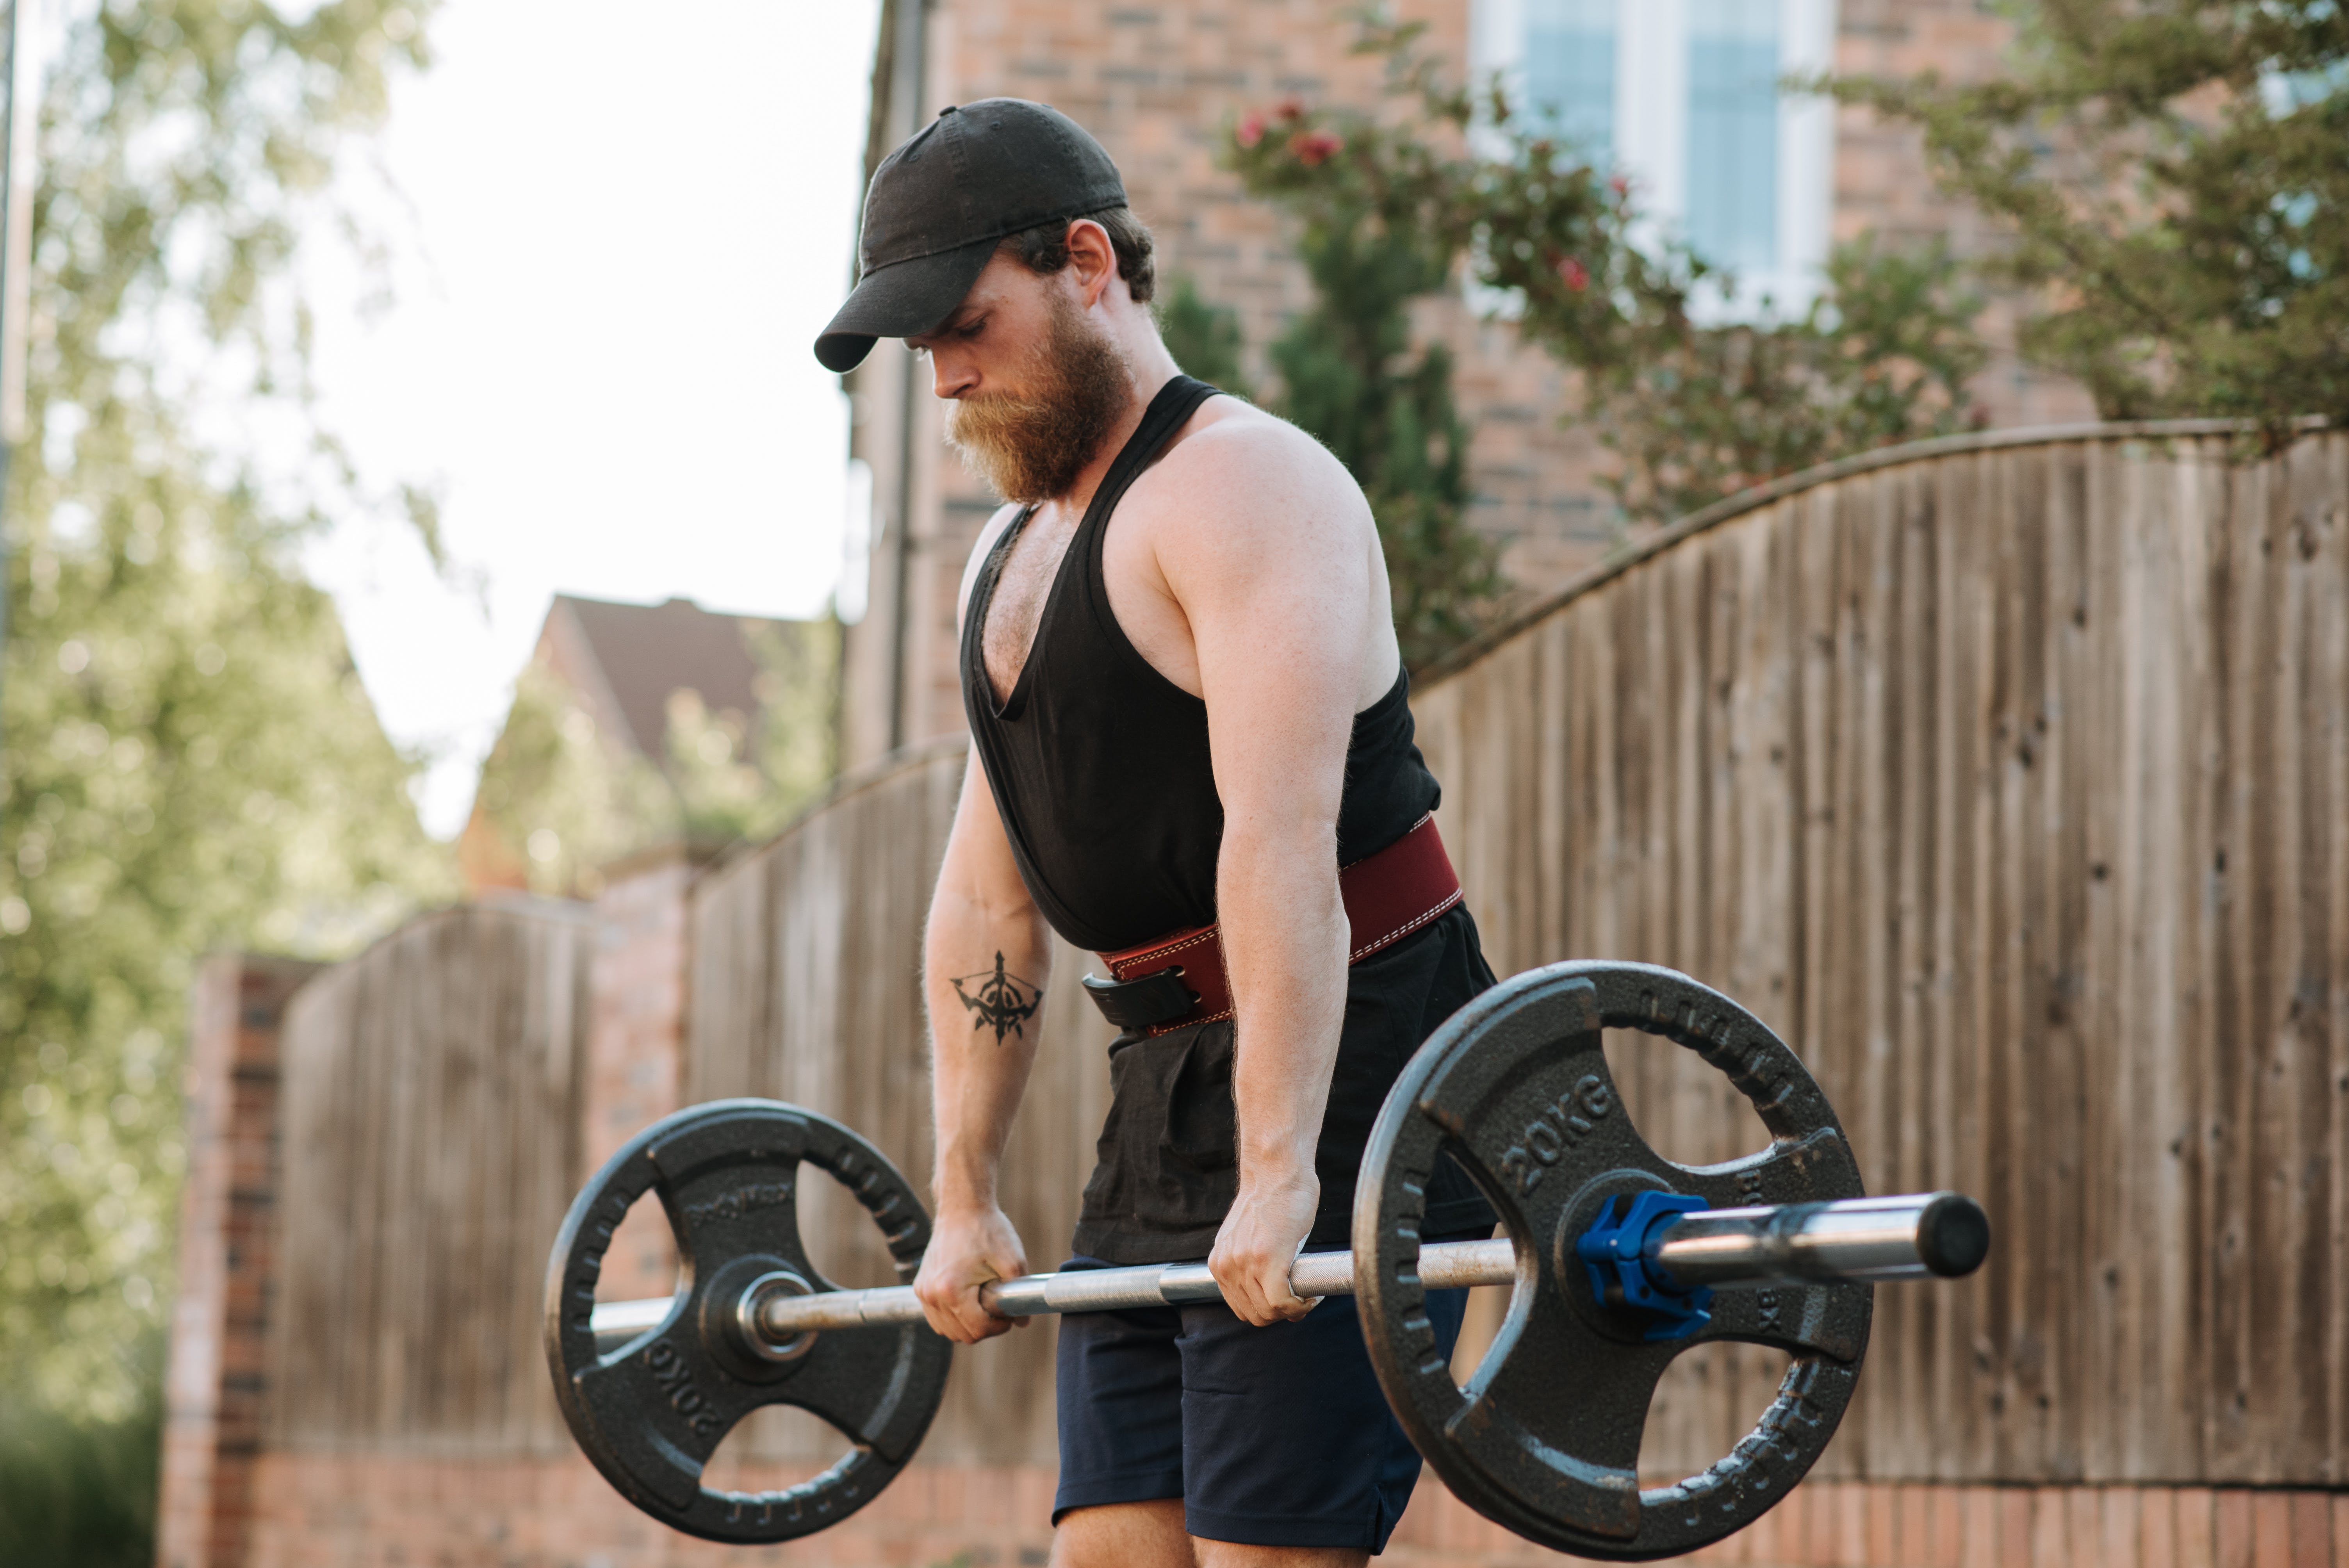 A man working out in the street with a barbell | Source: Pexels